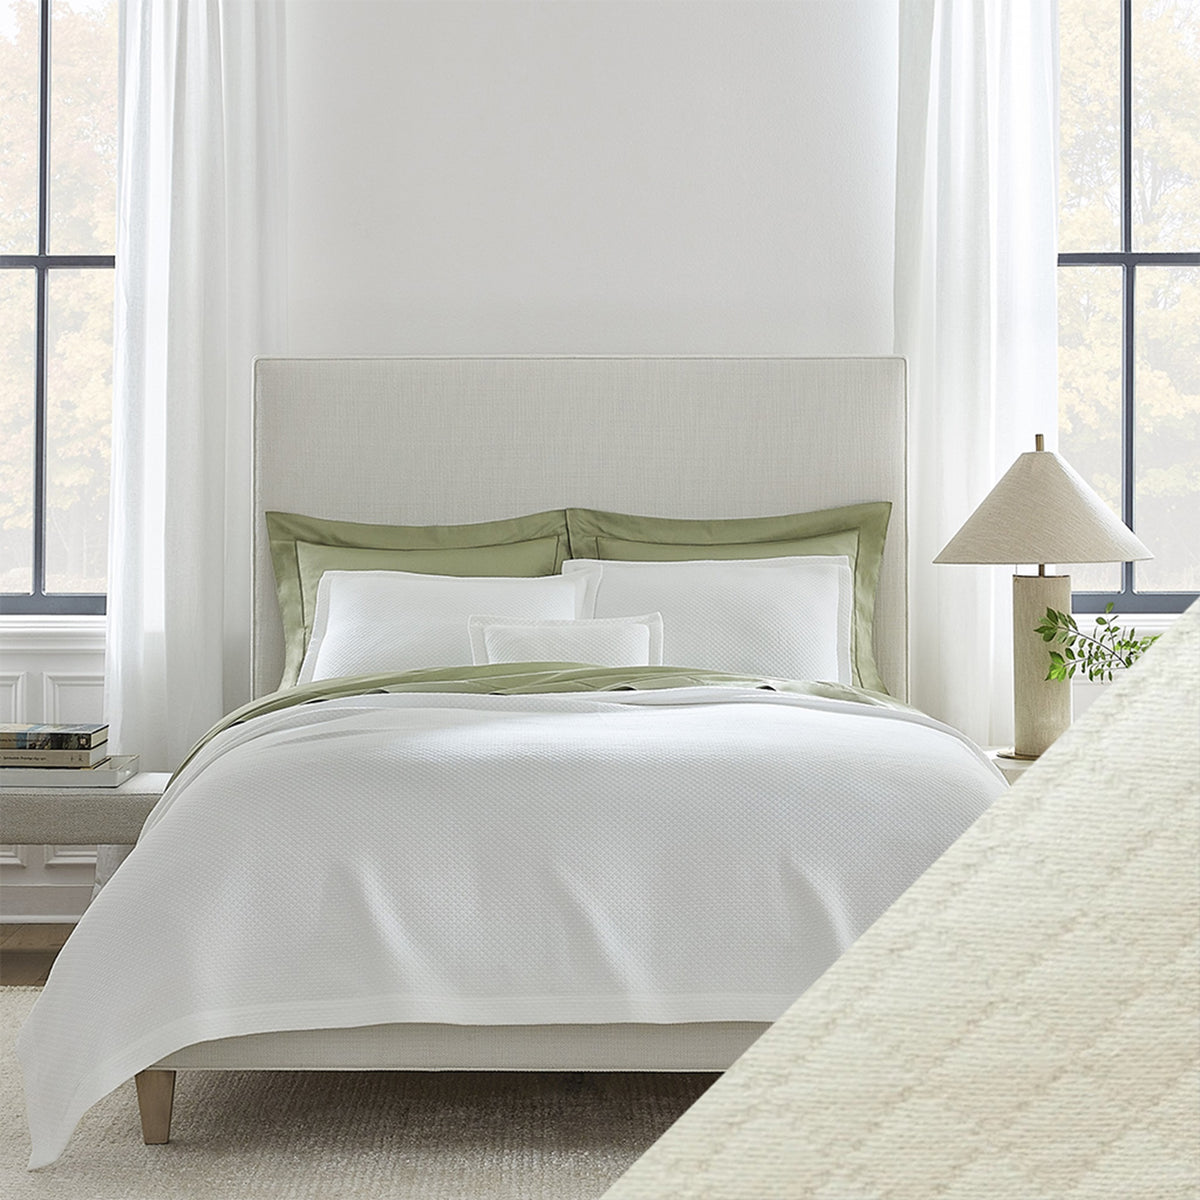 Full View of Sferra Rombo Bedding with Swatch Oyster Color